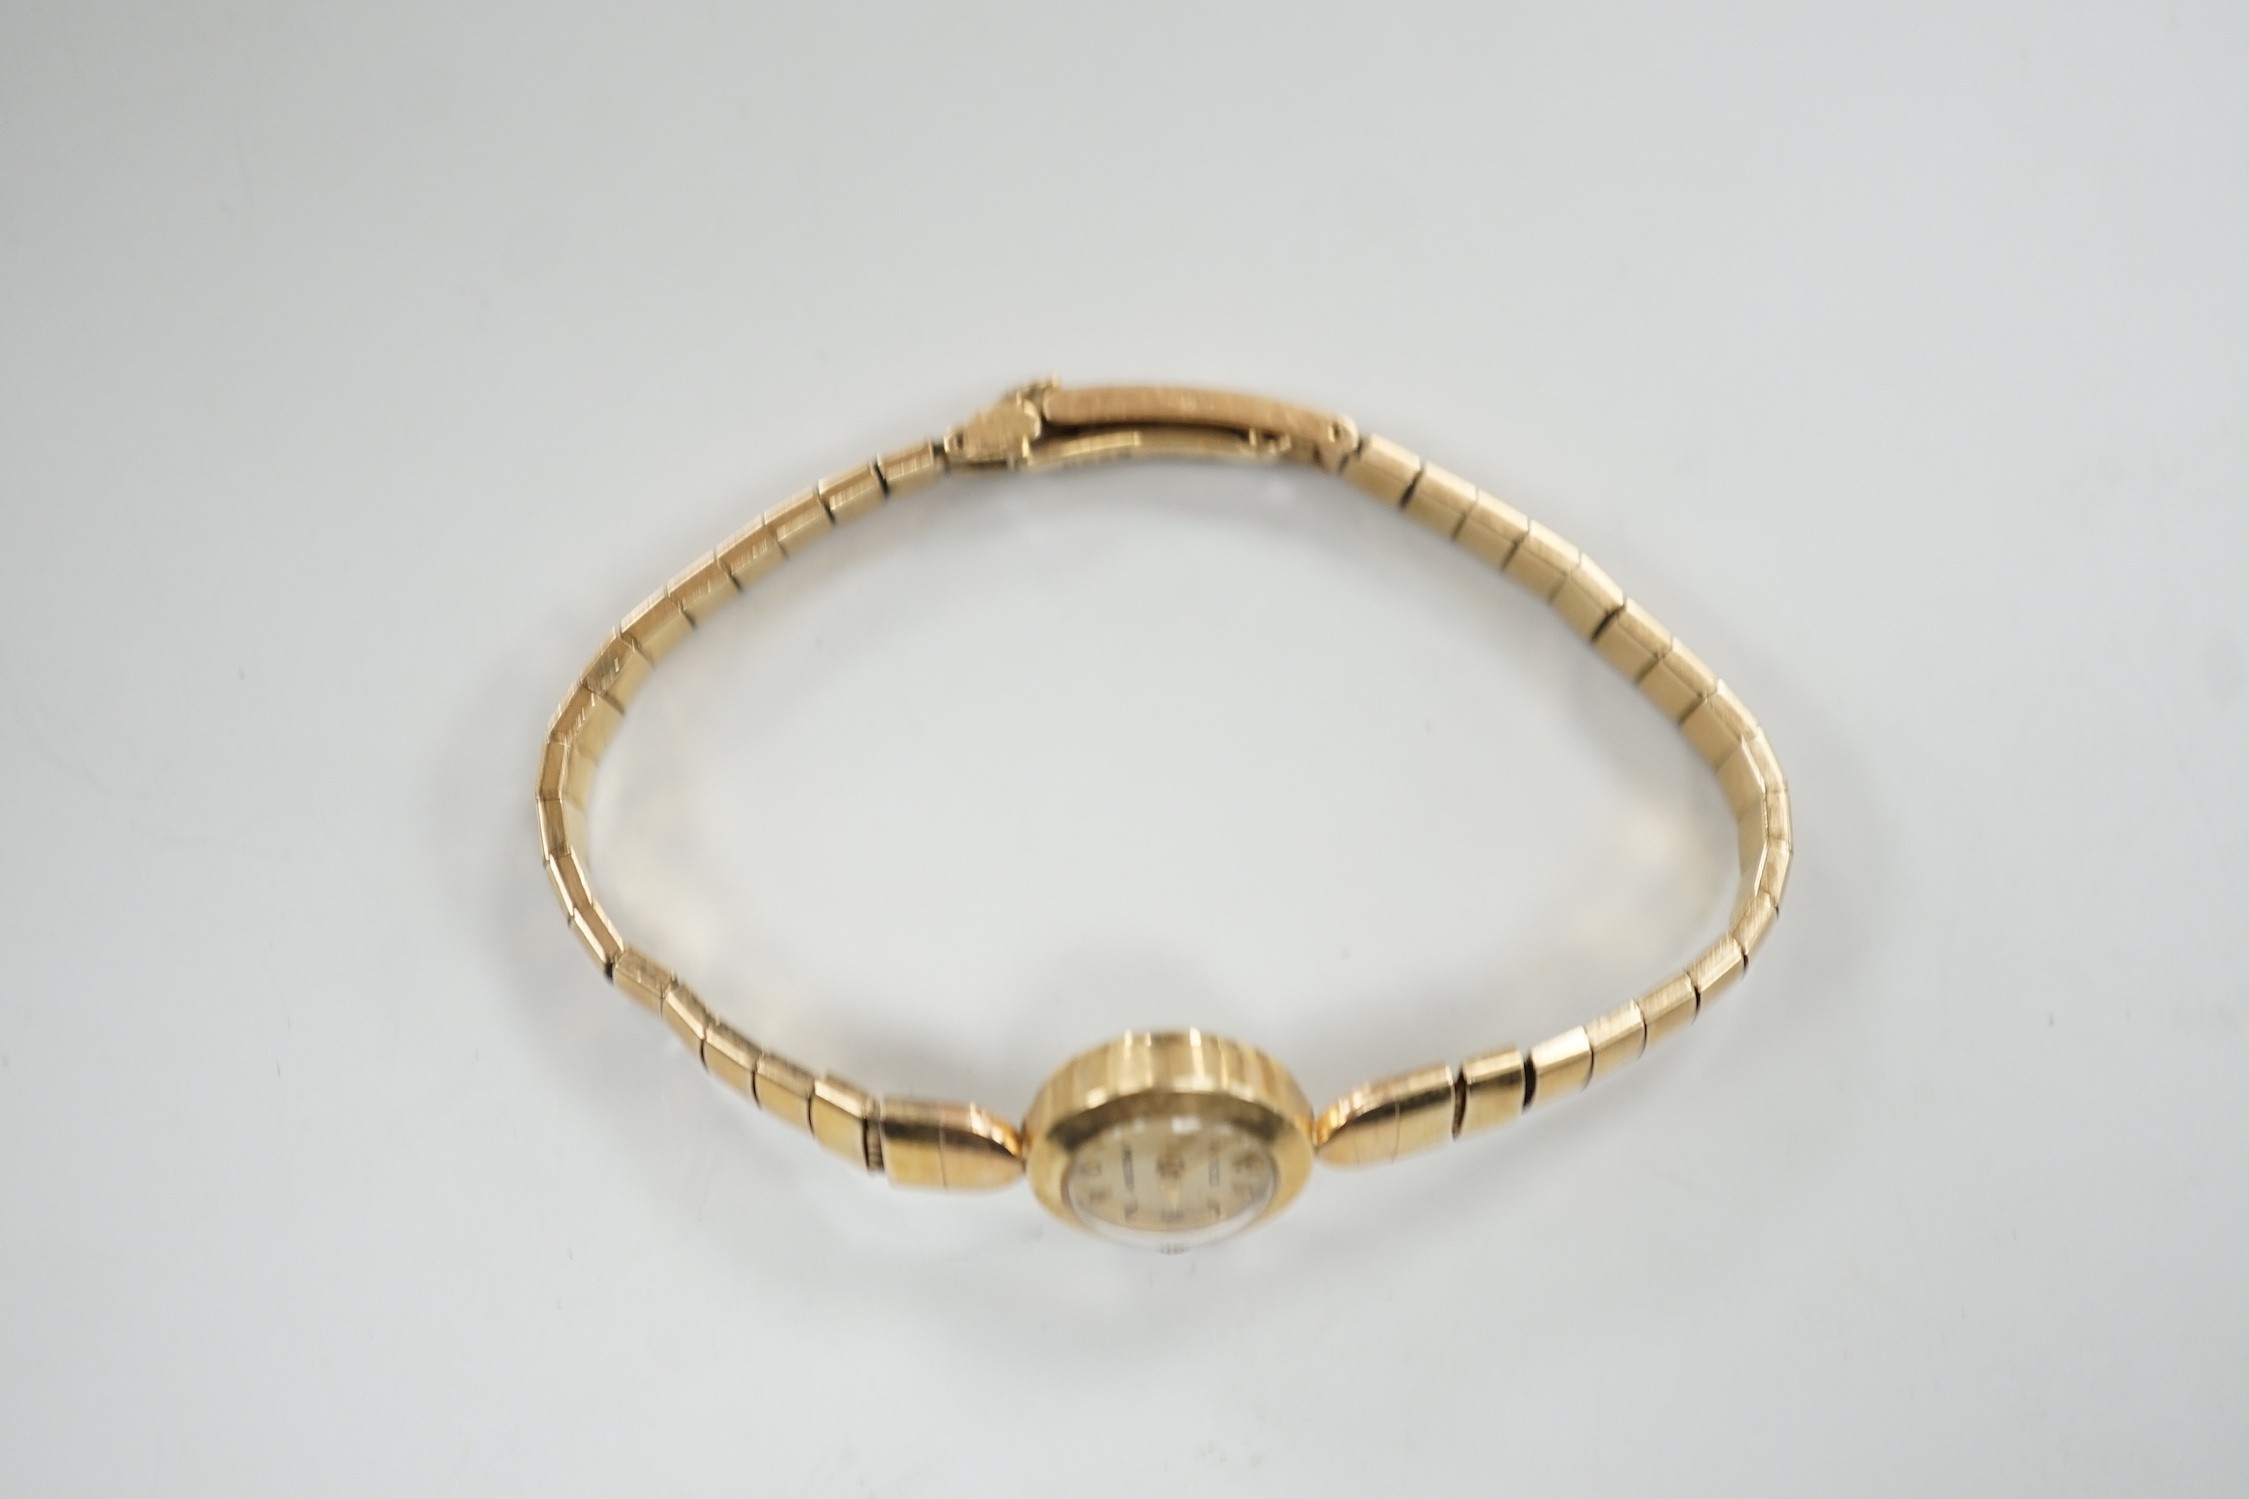 A lady's 9ct gold Rolex Precision manual wind wrist watch, on 9ct gold Rolex bracelet, case diameter 16mm, gross weight 16.8 grams, with Rolex box.